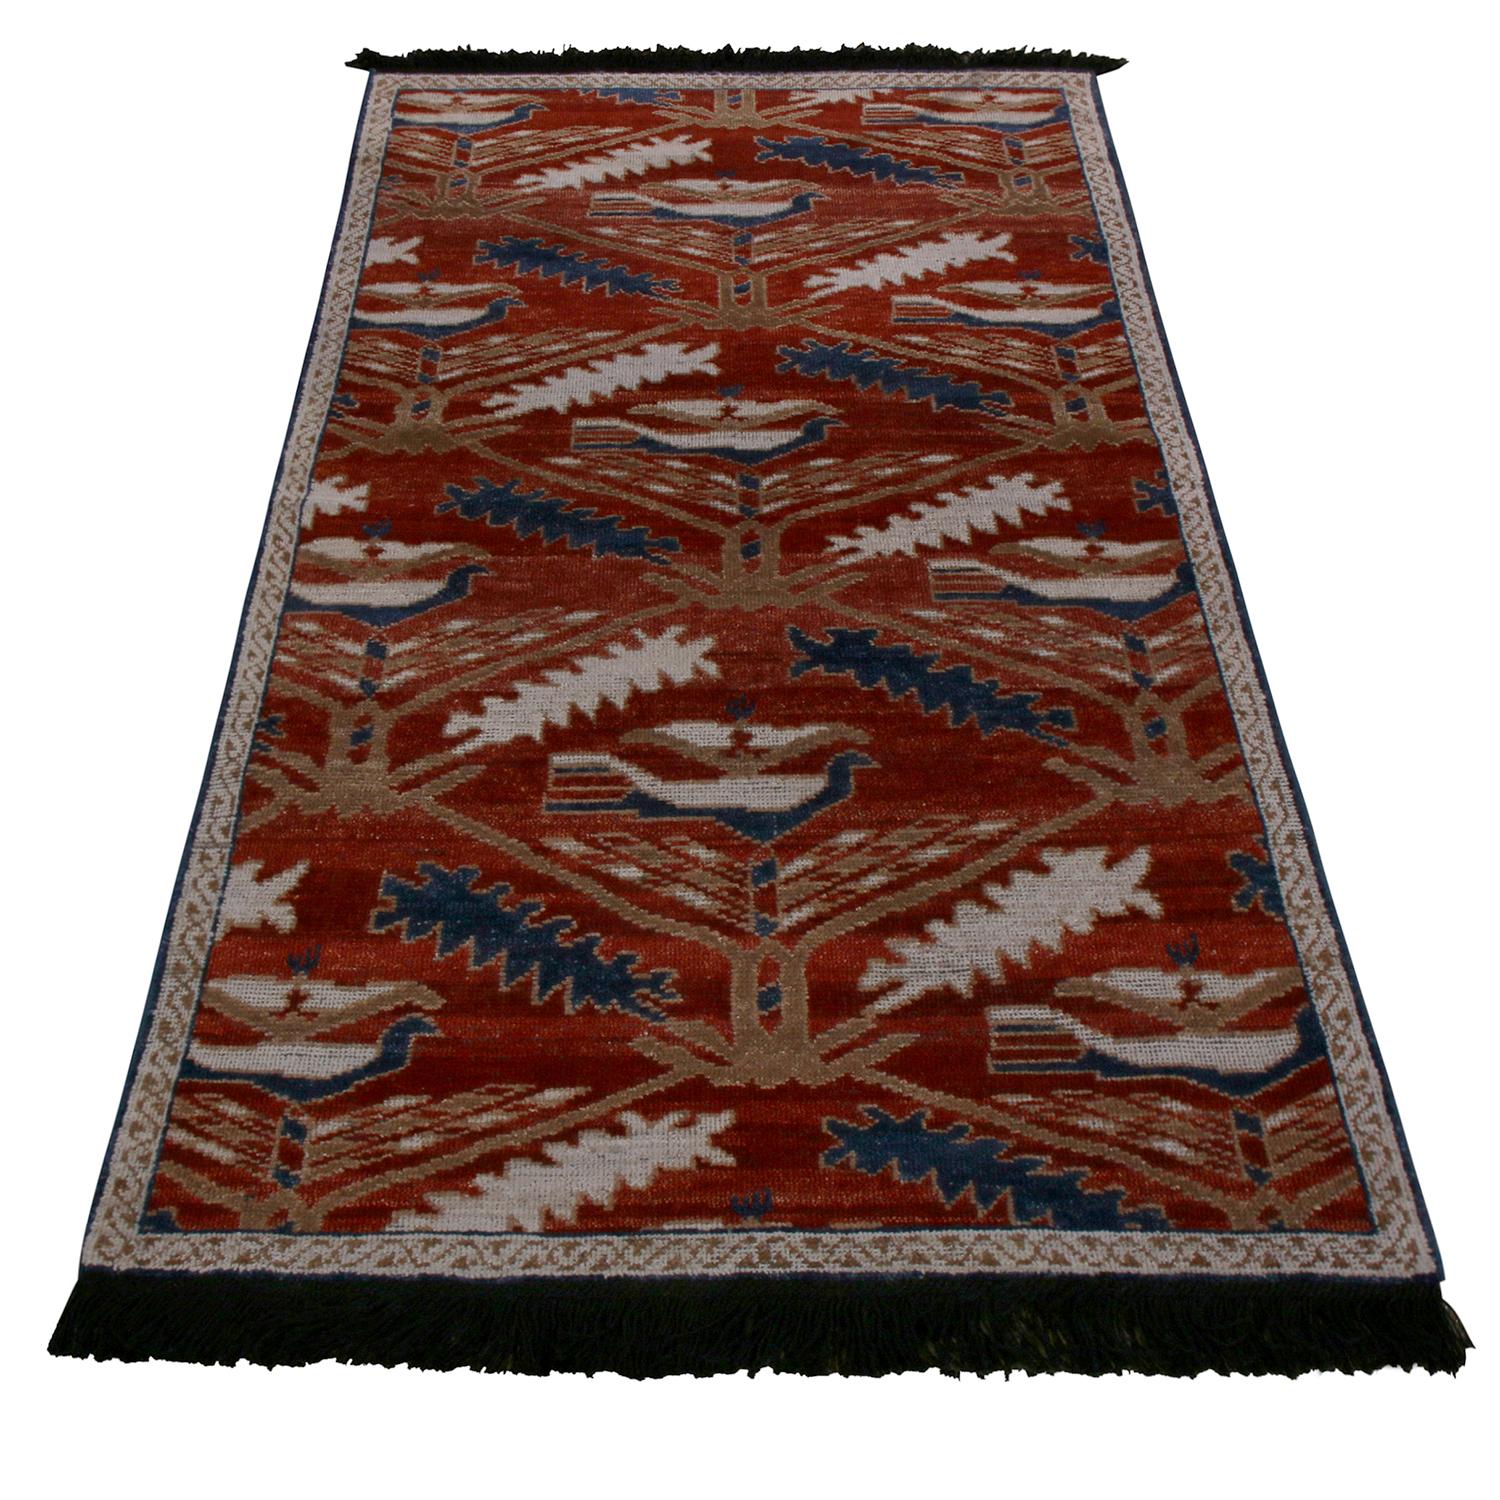 Hand knotted in an exceptionally soft Ghazni wool with a unique blend of yarns, this 3 x 6 custom runner hails from the latest additions to Rug & Kilim’s Burano Collection, reputed for its pioneering method of capturing classic patterns with